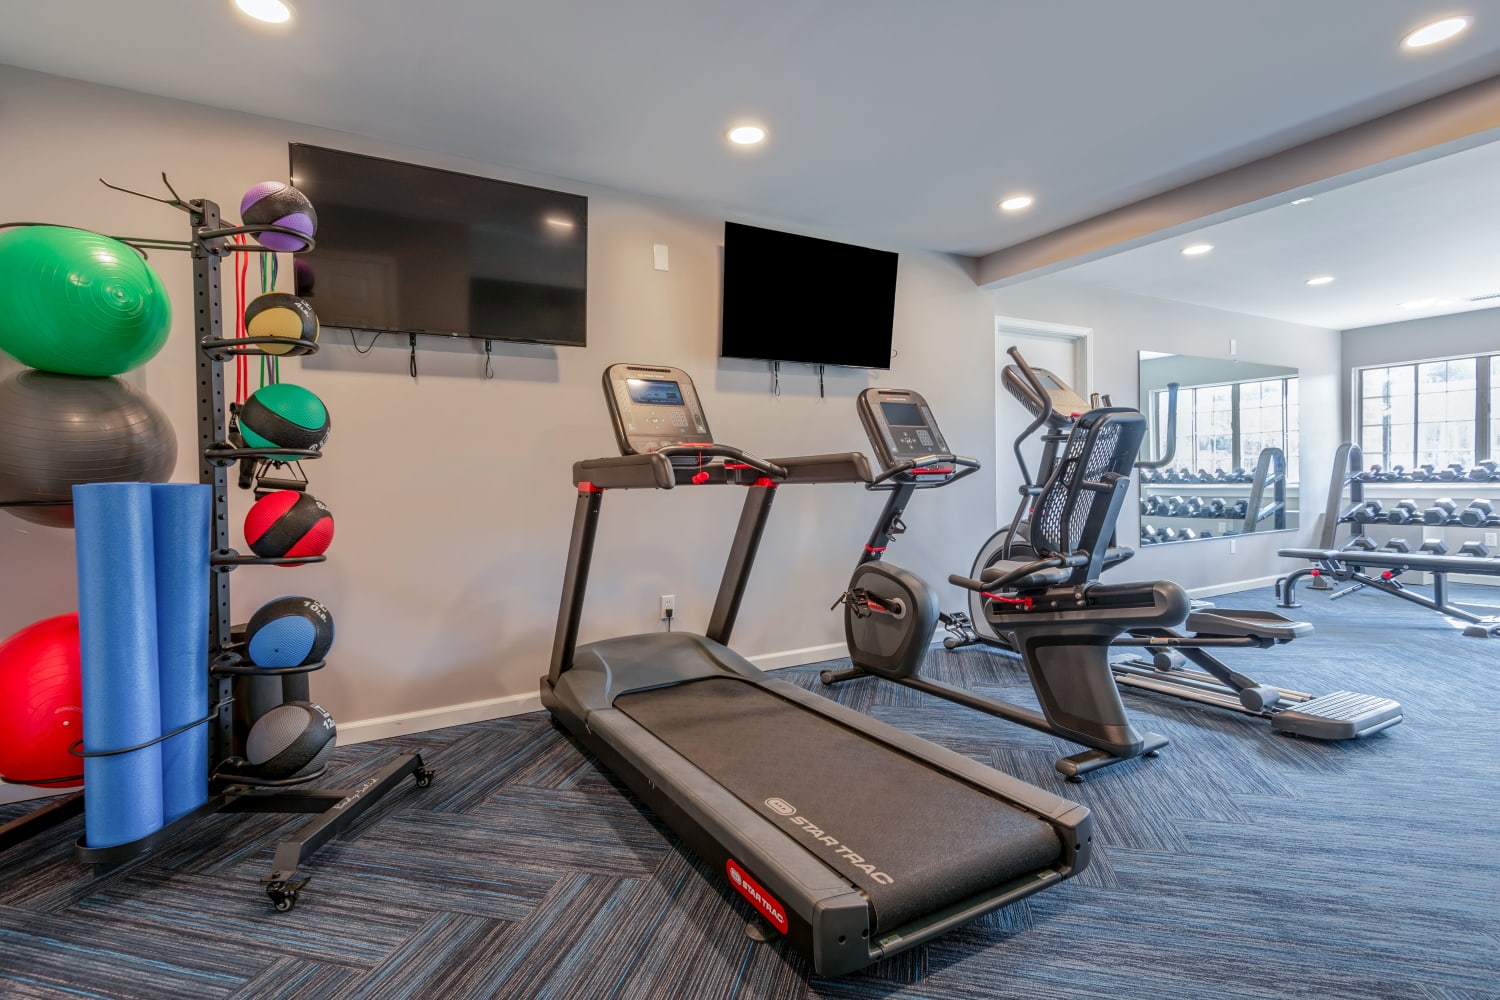 Fitness center at Waverlywood Apartments & Townhomes in Webster, New York